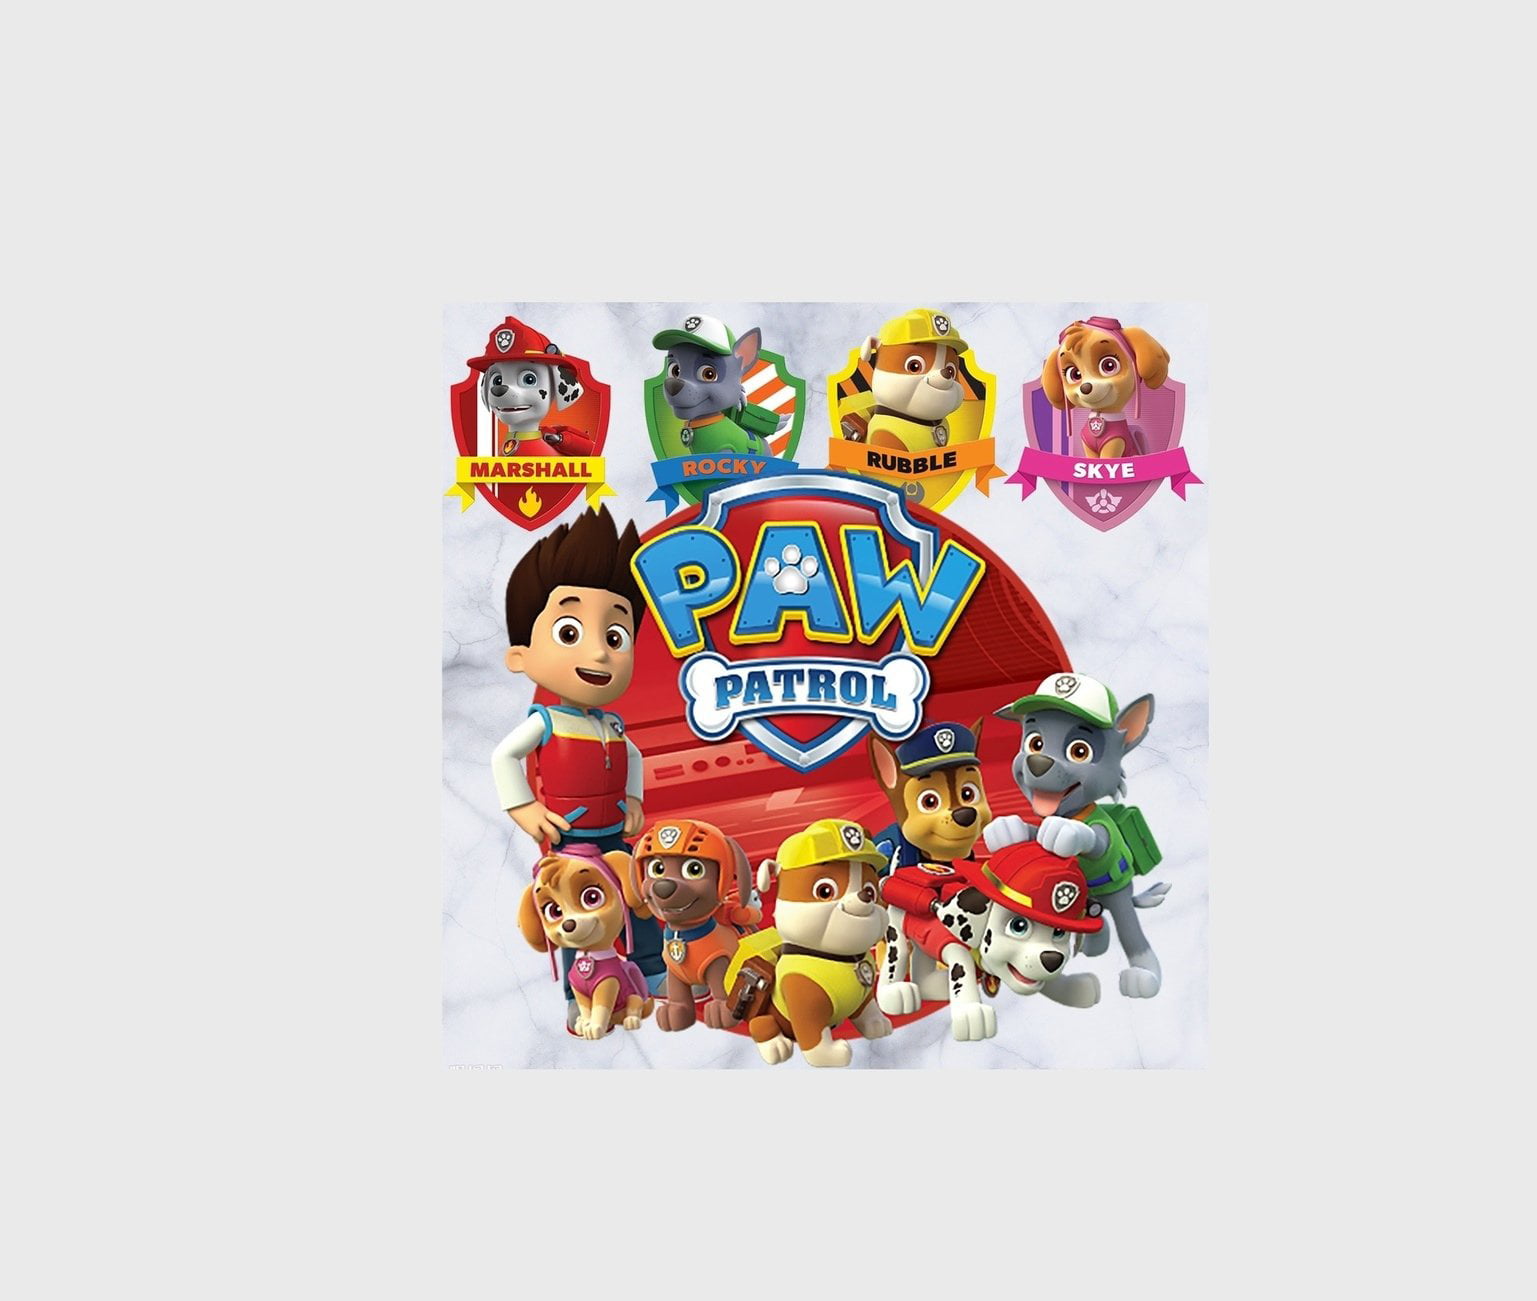 Paw Patrol Cake Topper Marshall Skye Chase Rubble Zuma Rocky Ryder Personalized and Printable Included cupcakes toppers with 20 designs